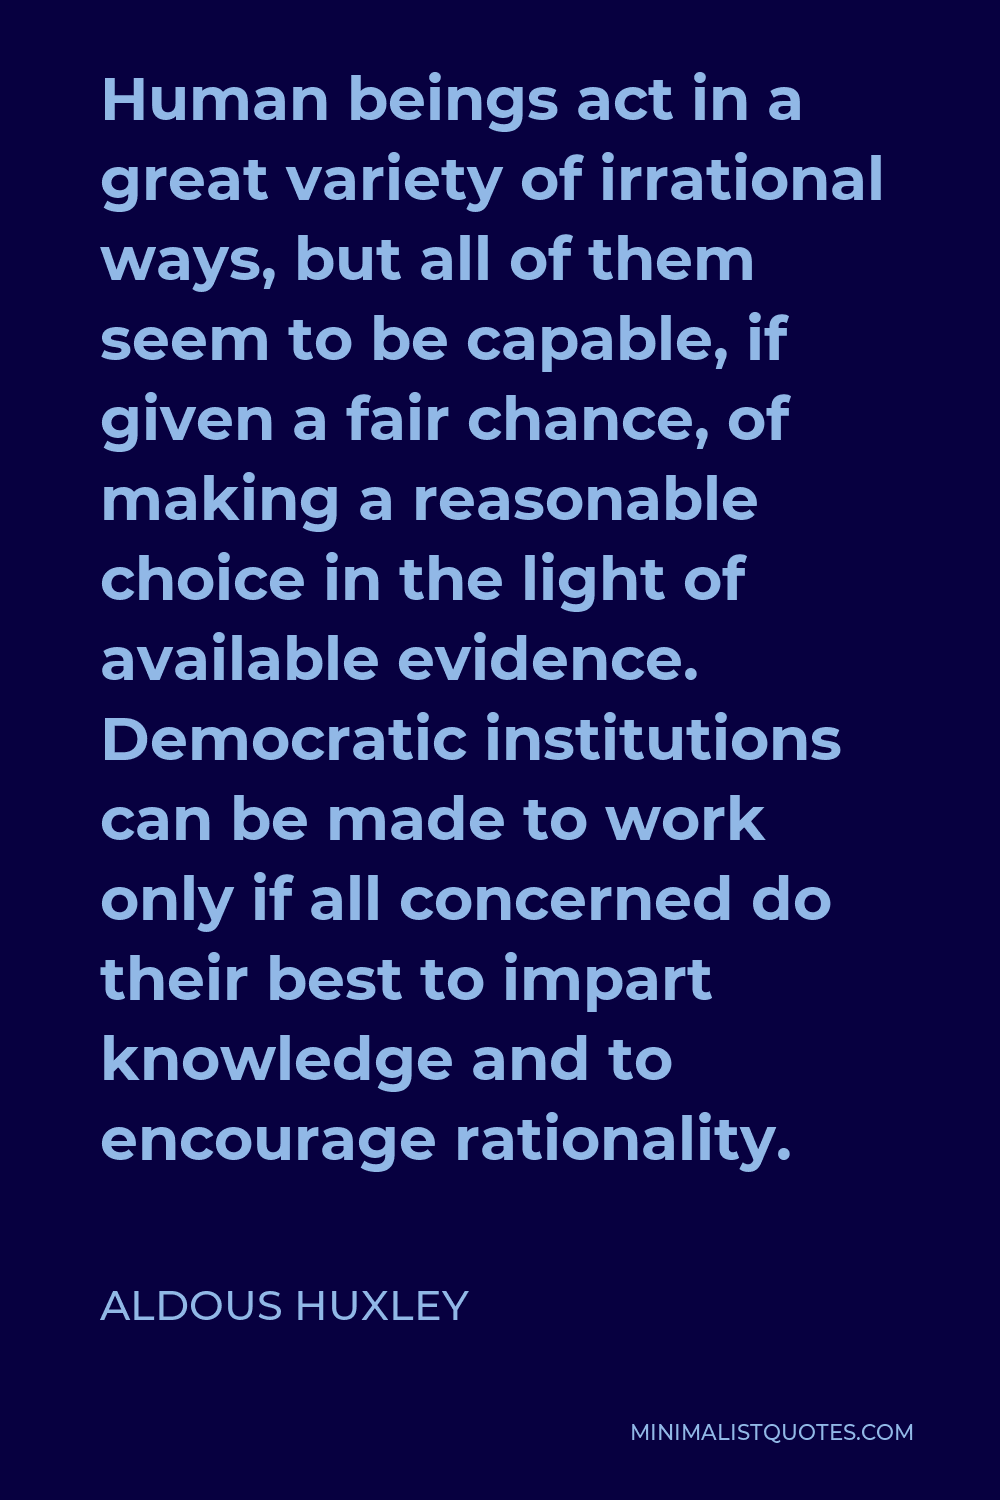 Aldous Huxley Quote - Human beings act in a great variety of irrational ways, but all of them seem to be capable, if given a fair chance, of making a reasonable choice in the light of available evidence. Democratic institutions can be made to work only if all concerned do their best to impart knowledge and to encourage rationality.